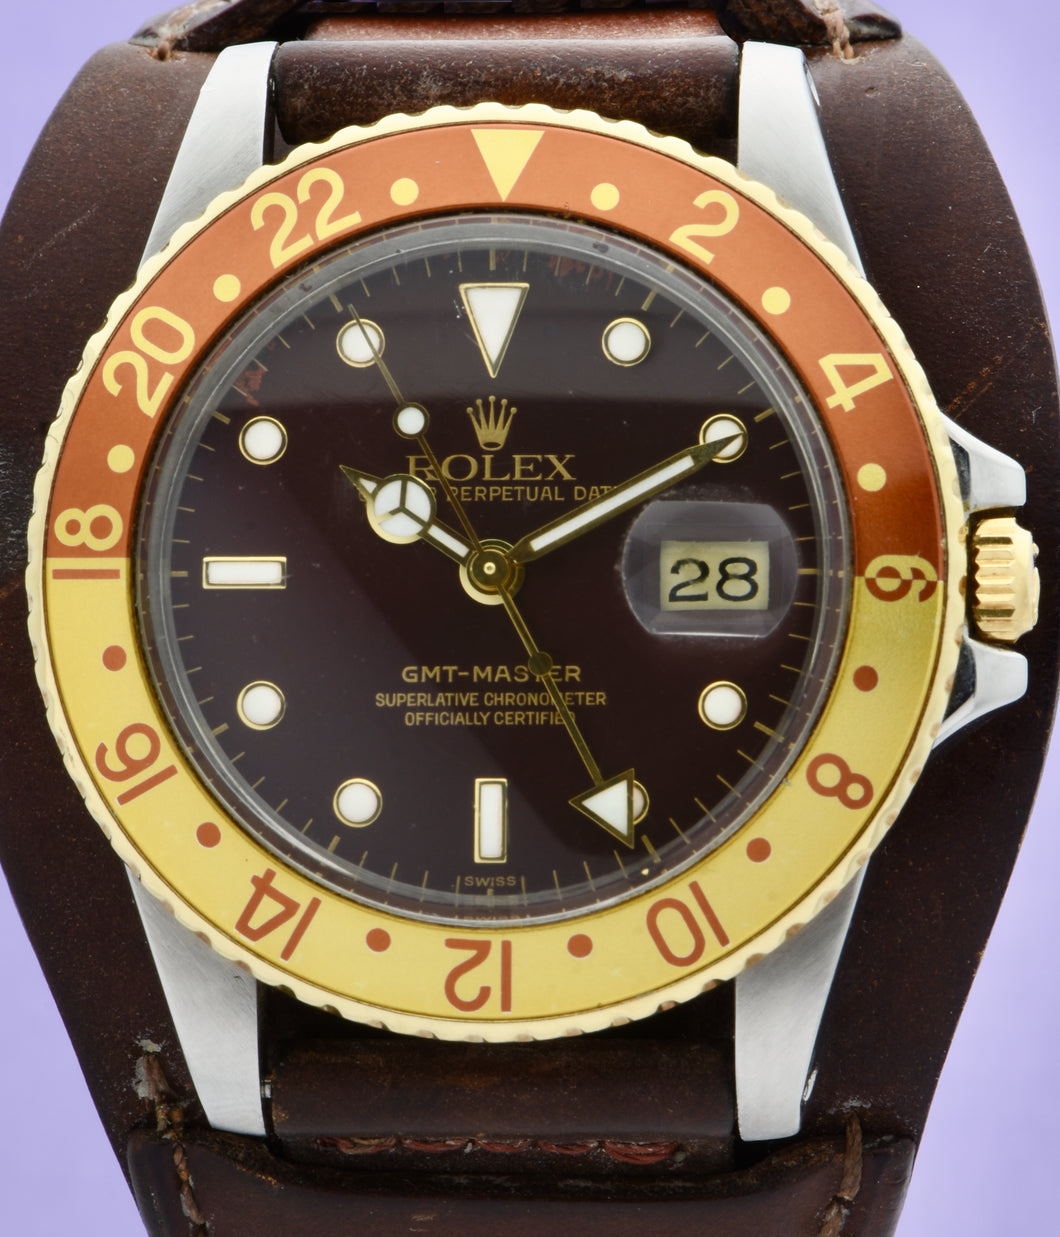 Rolex GMT-Master “Rootbeer” Dial, Ref. 16753